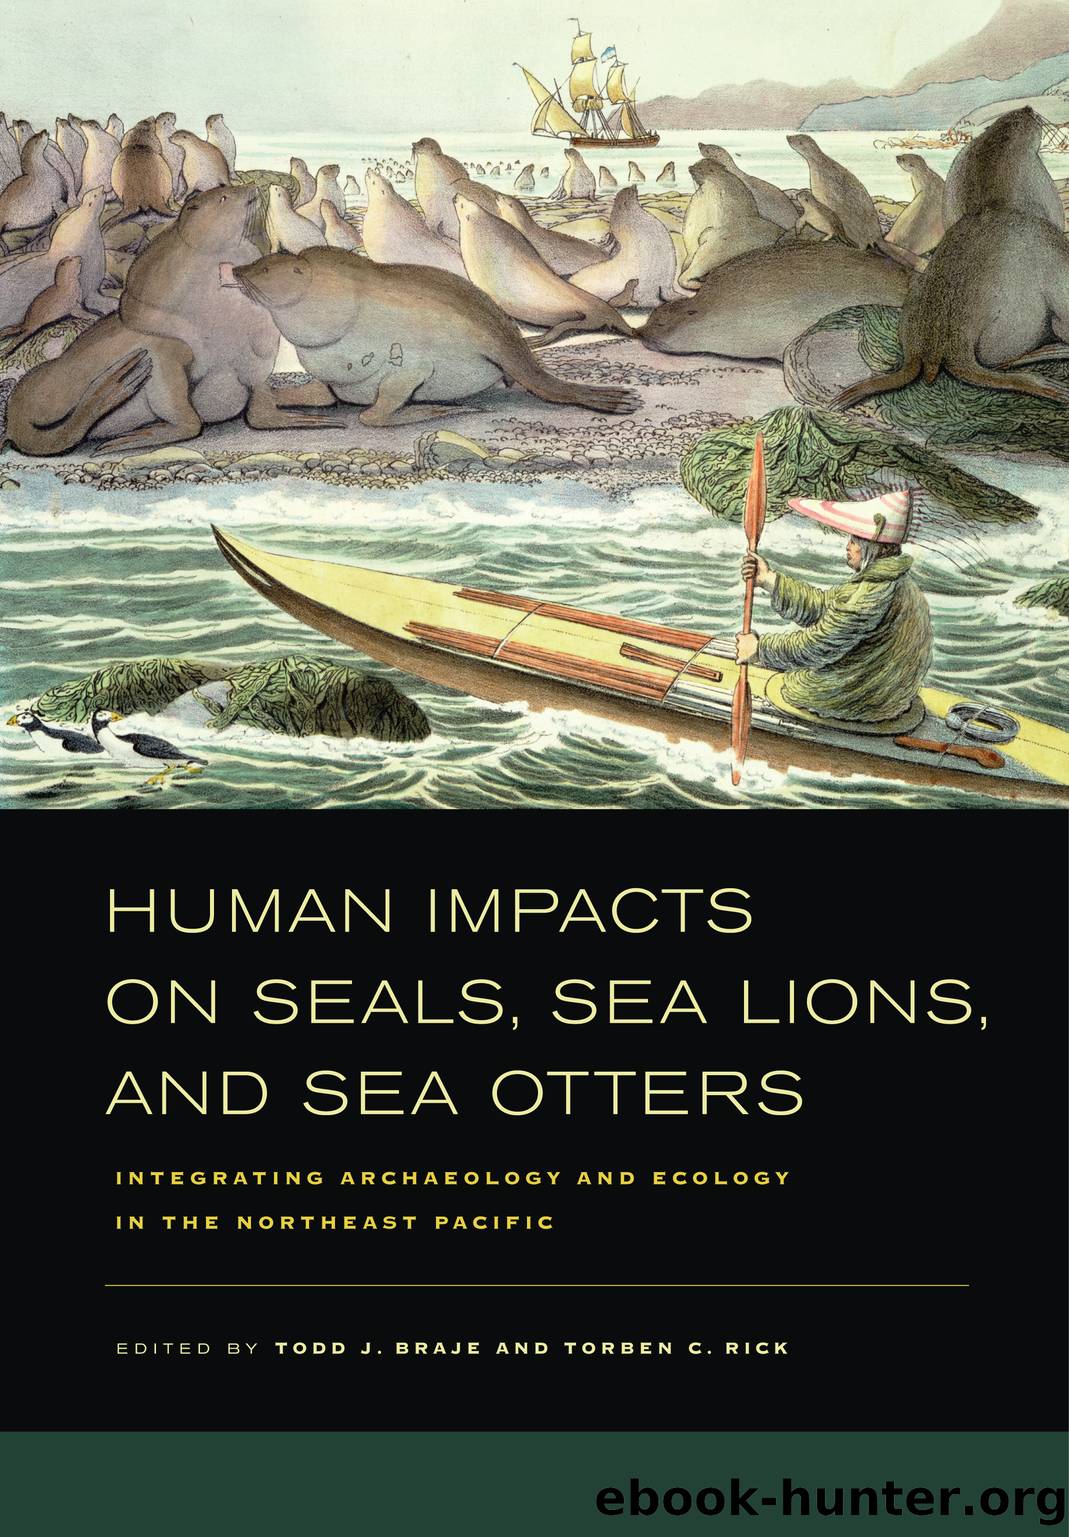 Human Impacts on Seals, Sea Lions, and Sea Otters by Braje Todd J. & Torben C. Rick